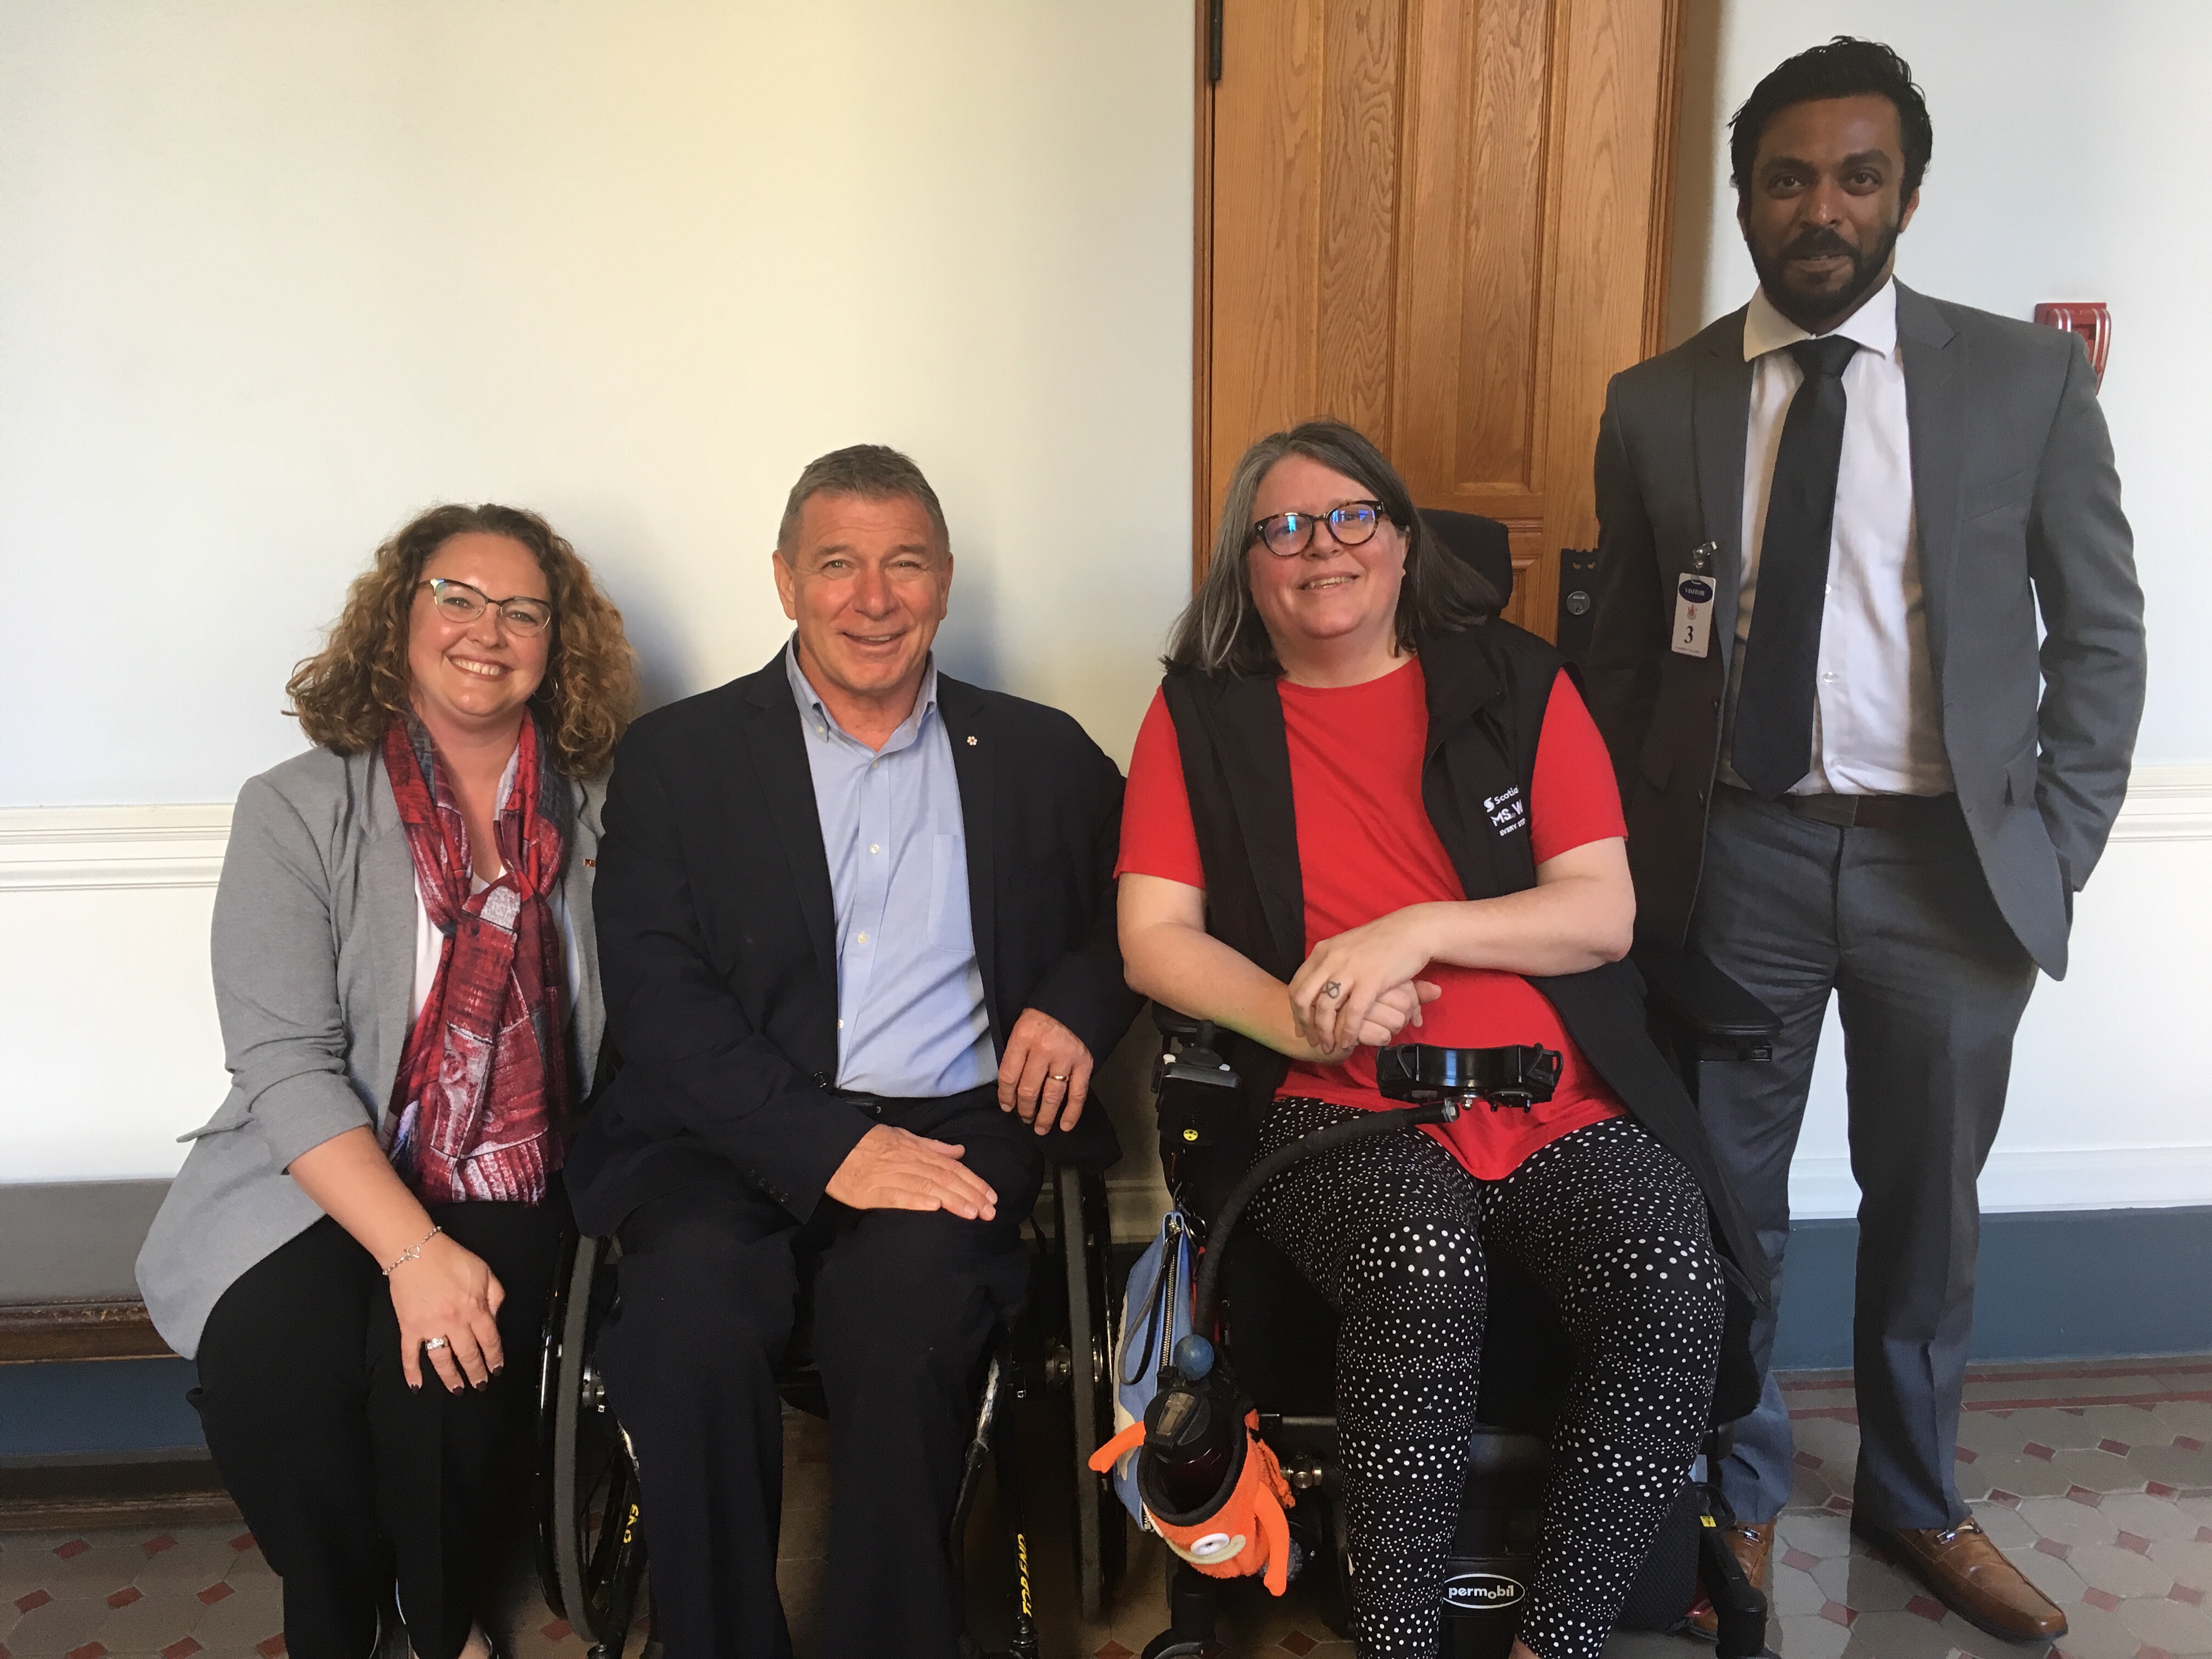 Michelle, Tania, Charles and Rick Hansen